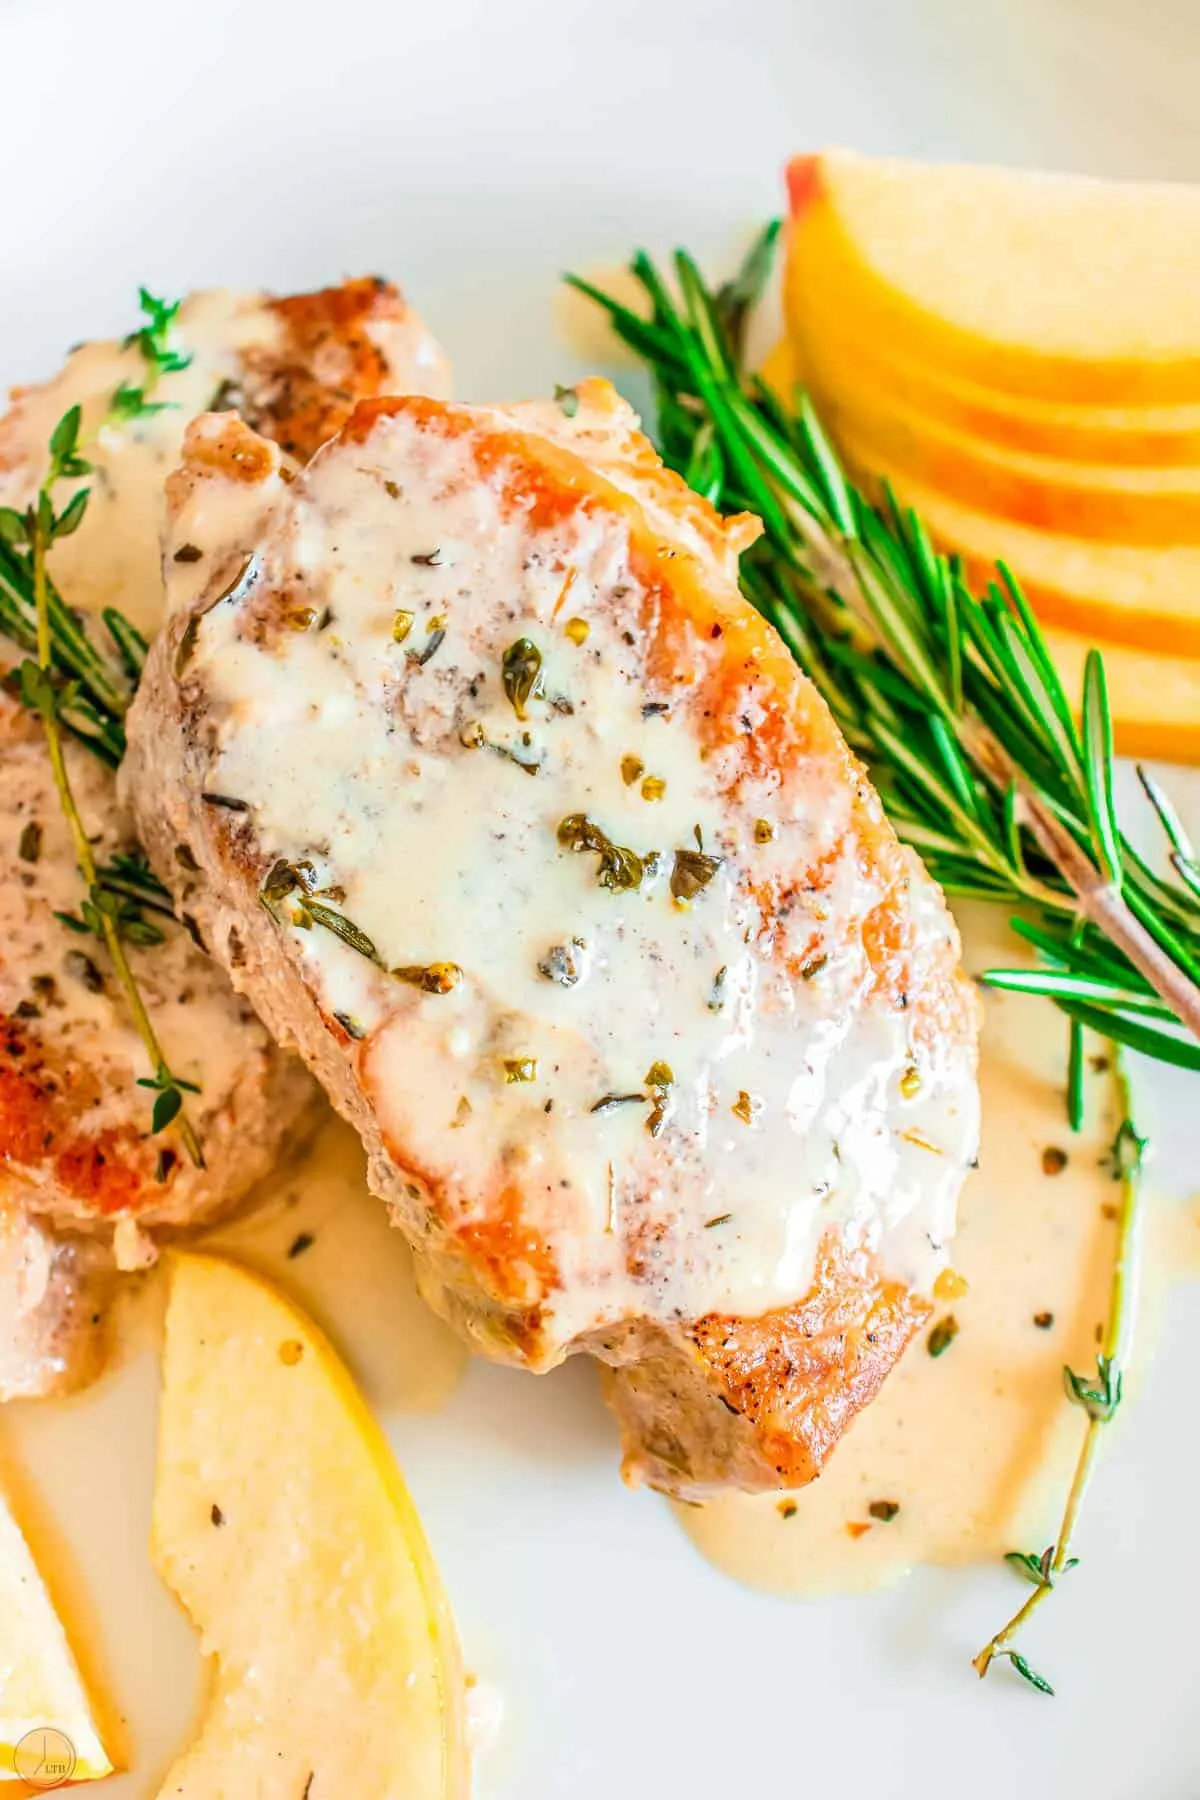 apple cider pork chops with a creamy sauce and apple slices on a plate